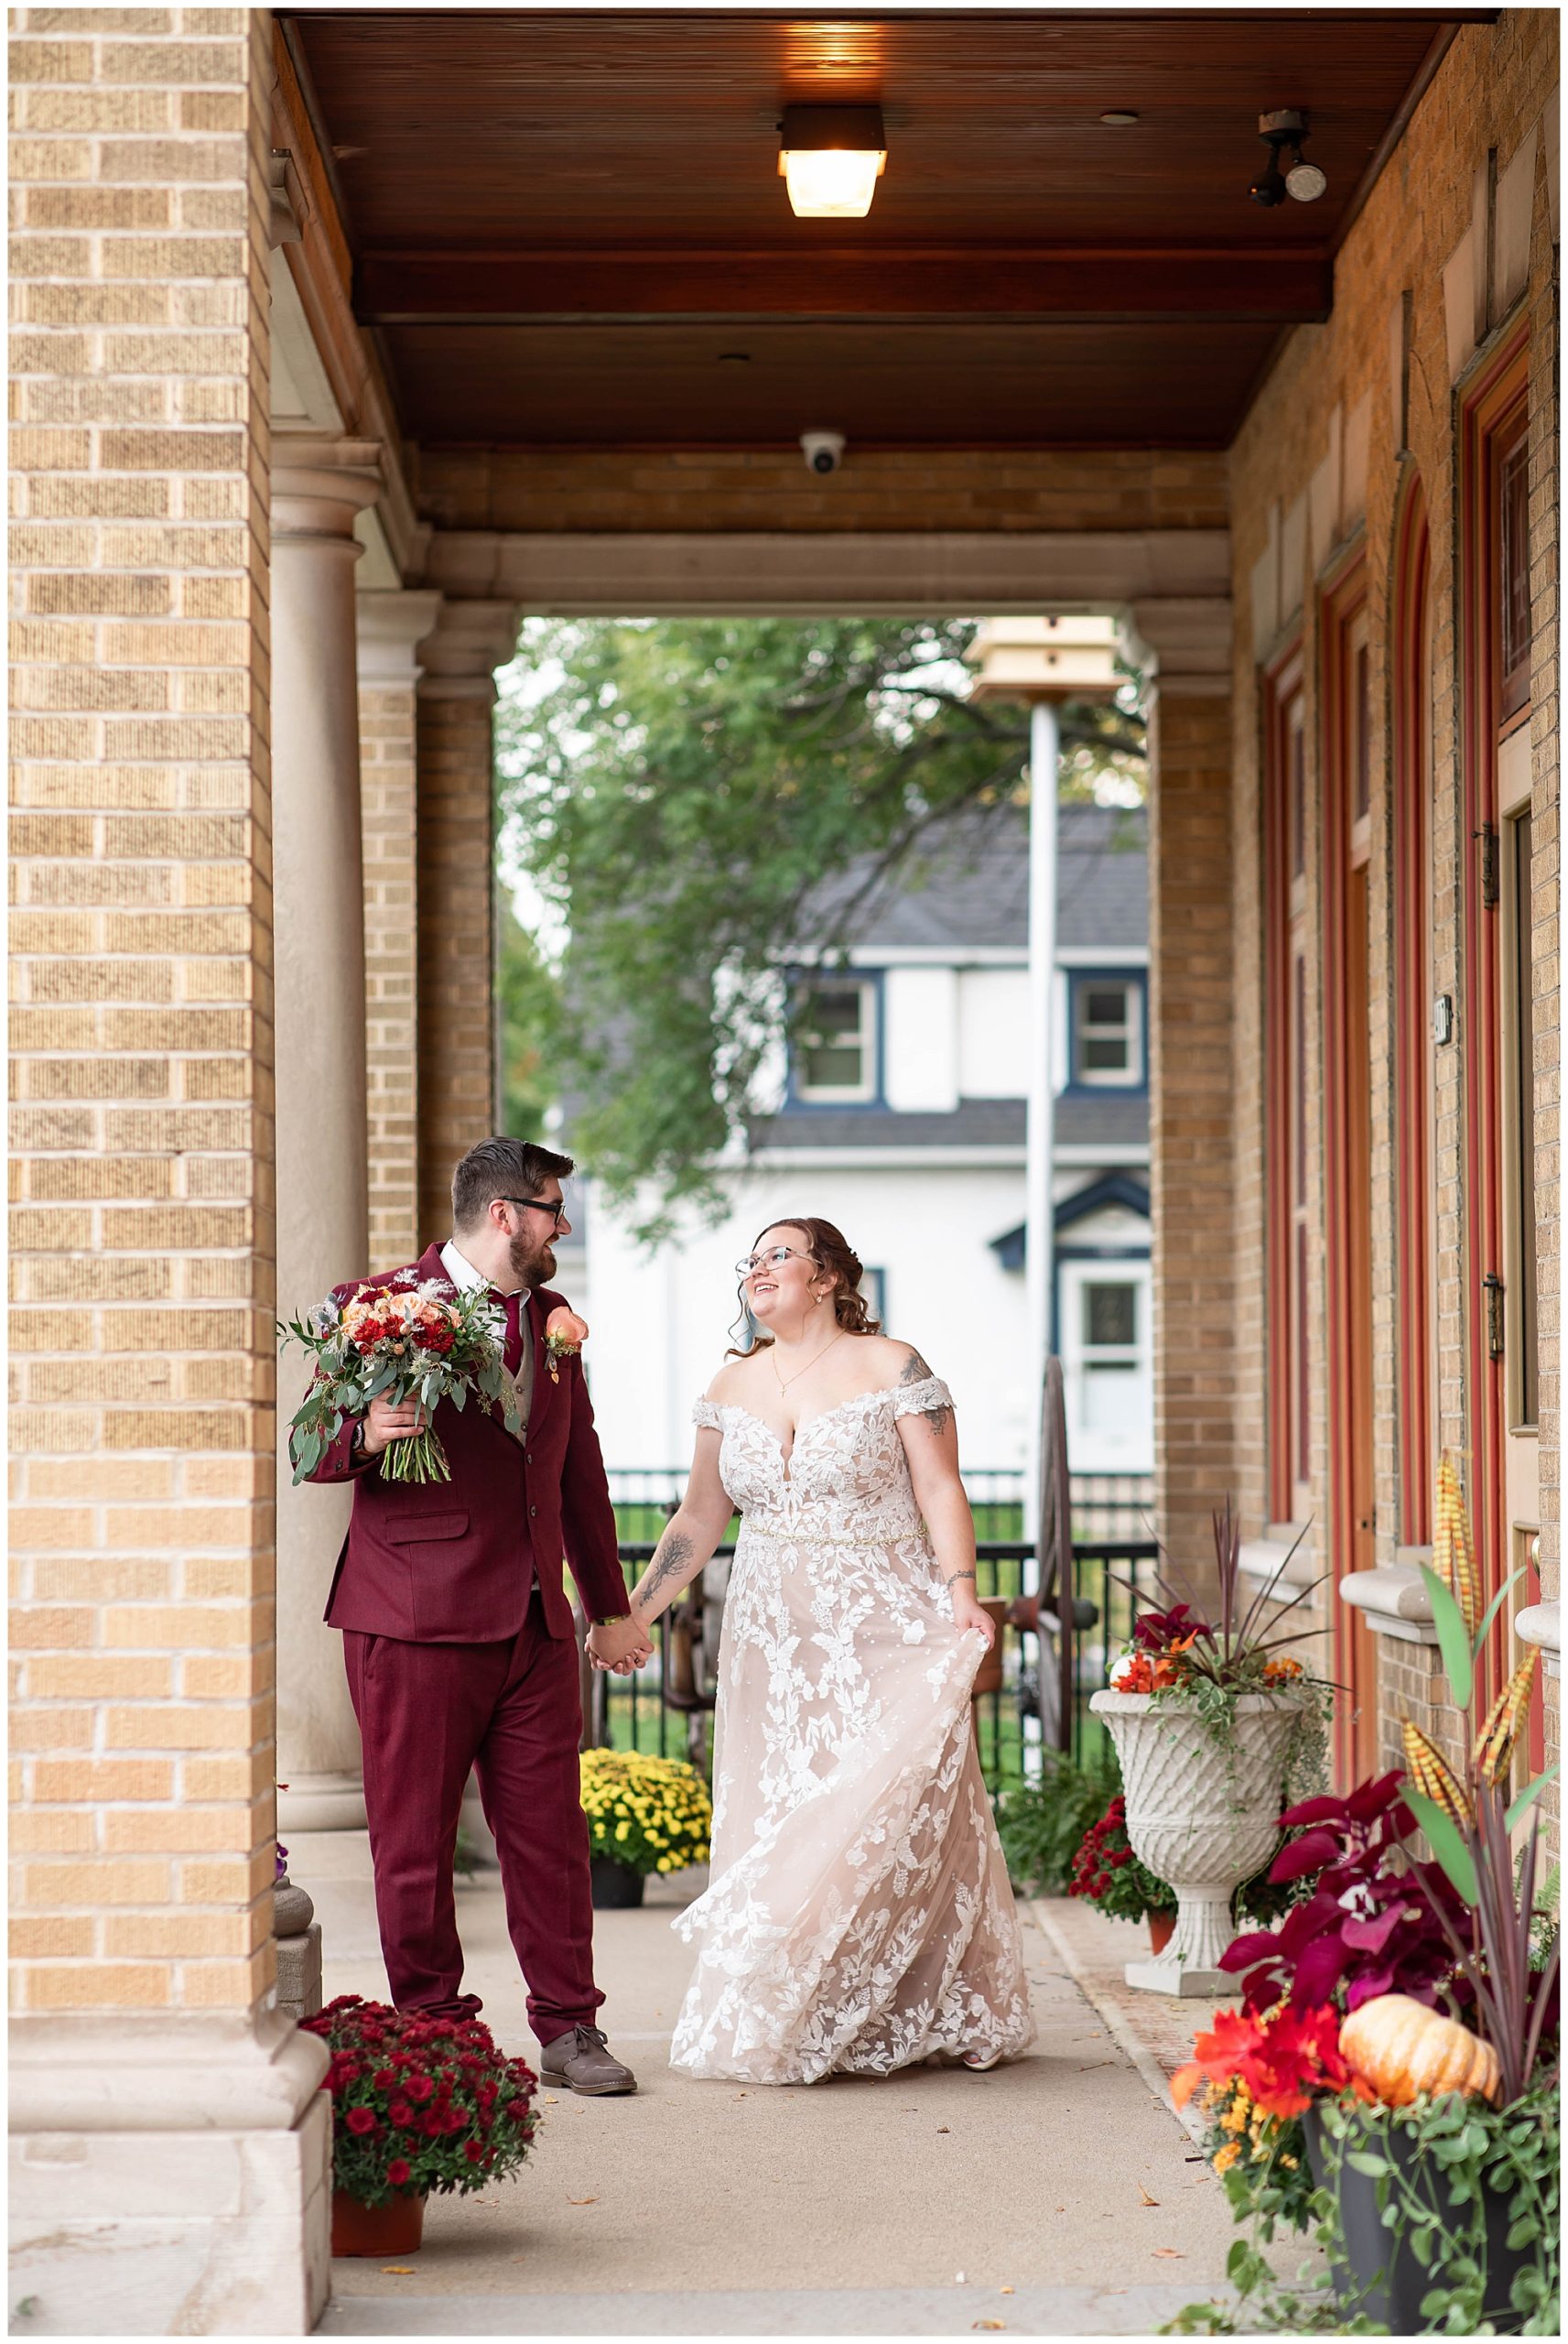 Couple's photos on front porch of Story Hill FireHouse during wedding 